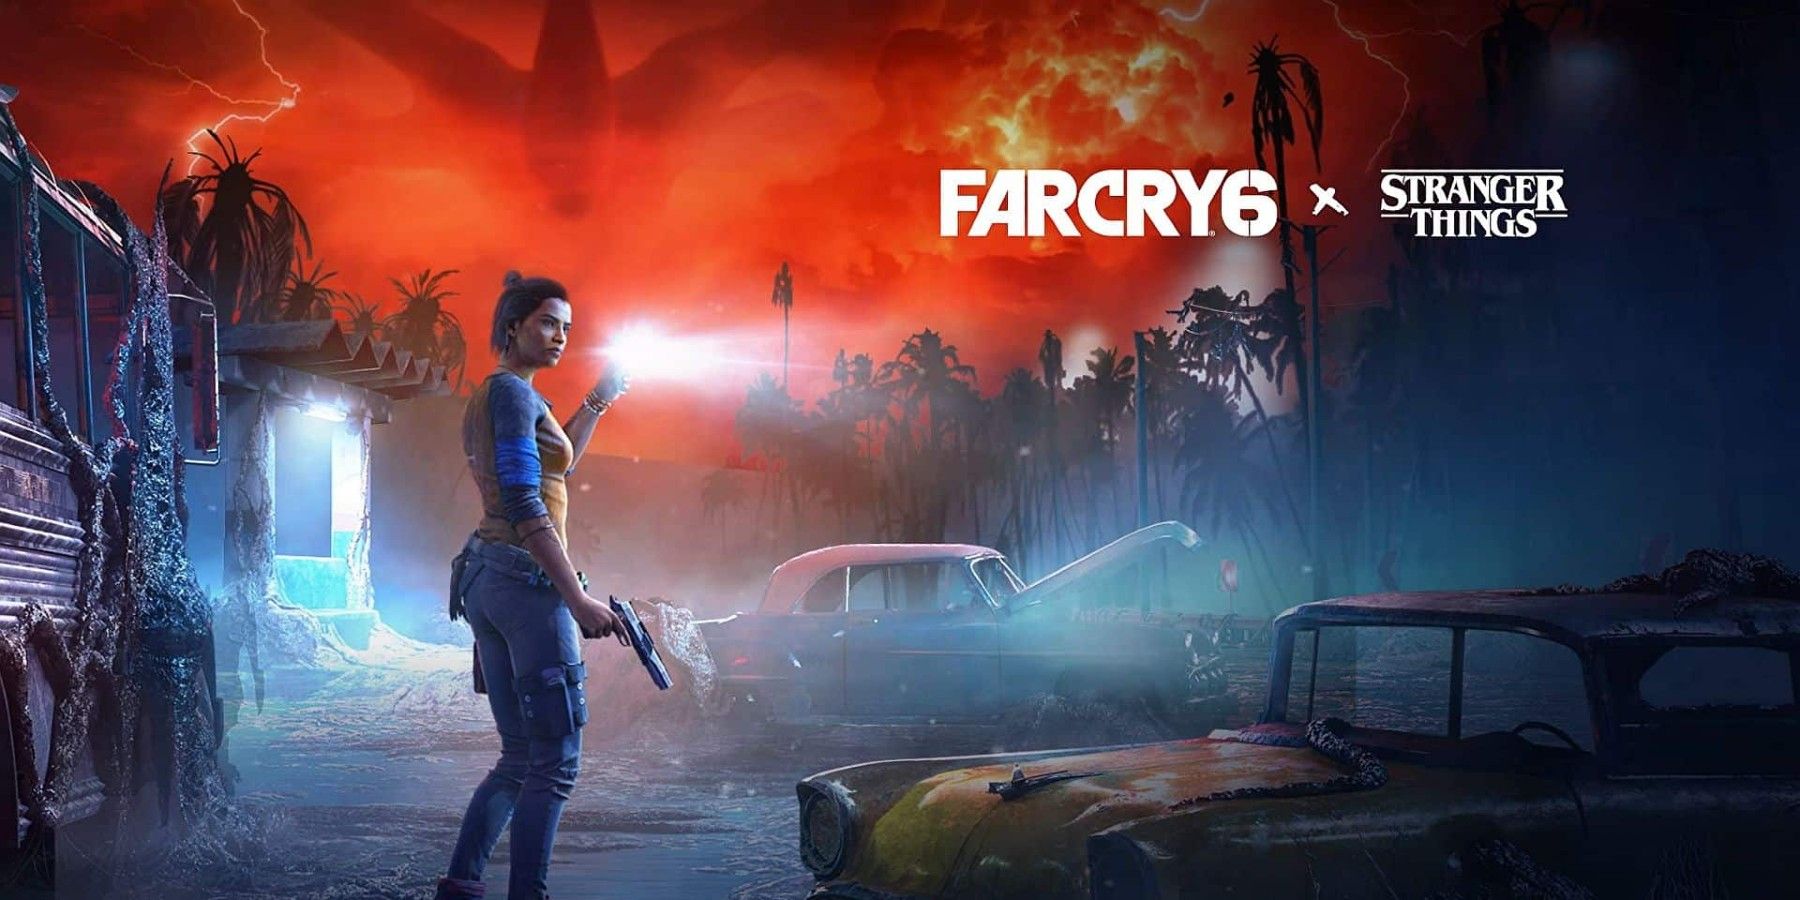 Far Cry 6: Stranger Things DLC - Review - Critical Hits